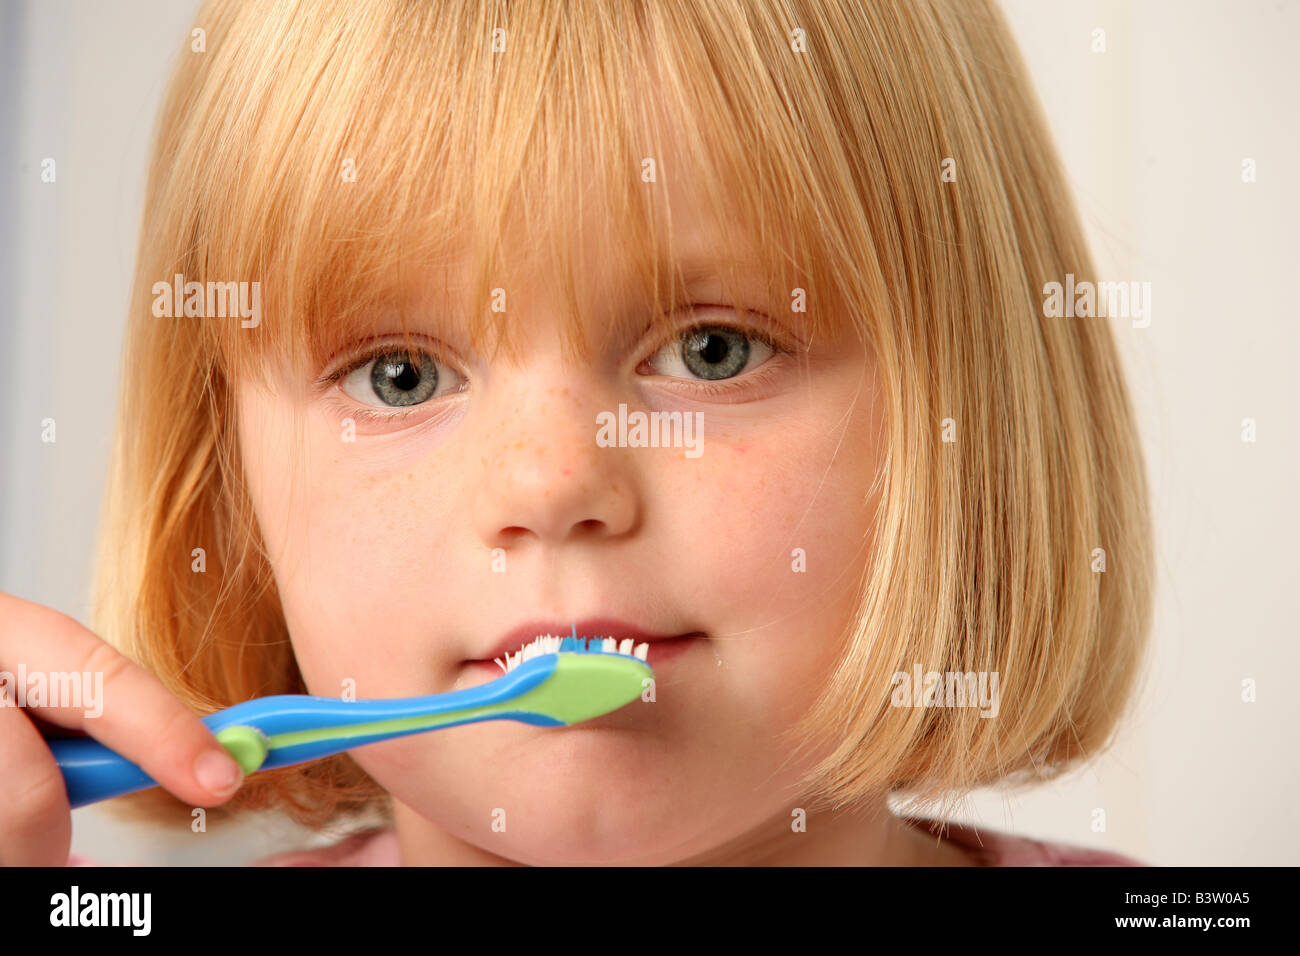 A young girl cleaning her teeth Stock Photo